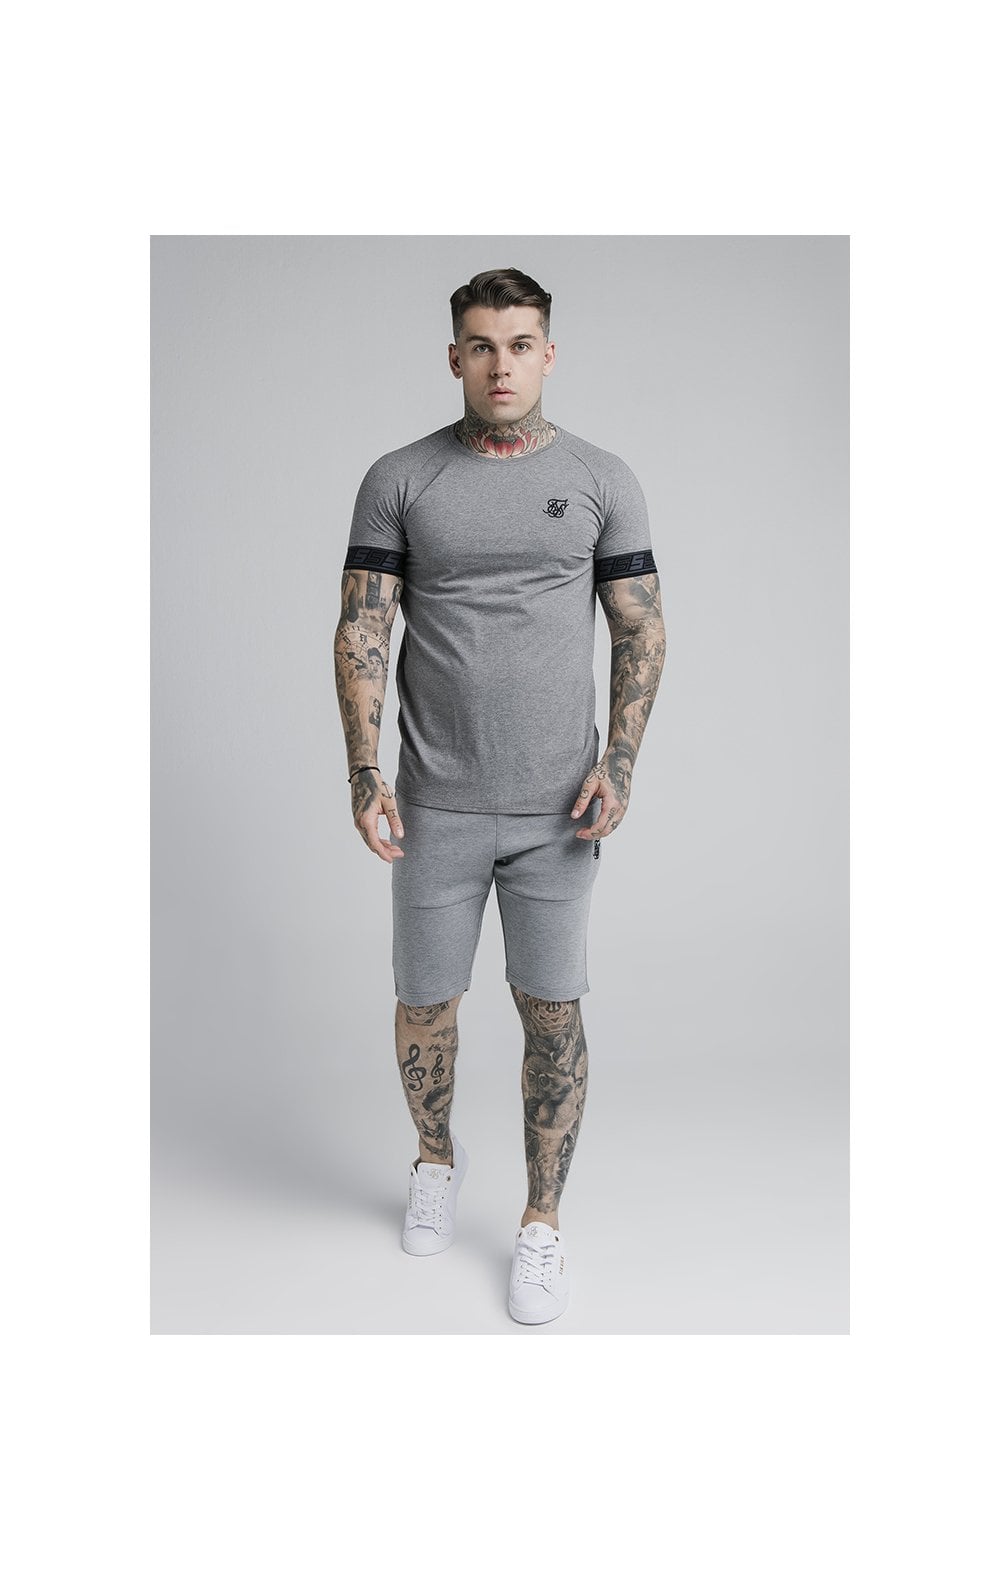 Load image into Gallery viewer, SikSilk S/S Exhibit Tech Tee - Grey Marl (4)